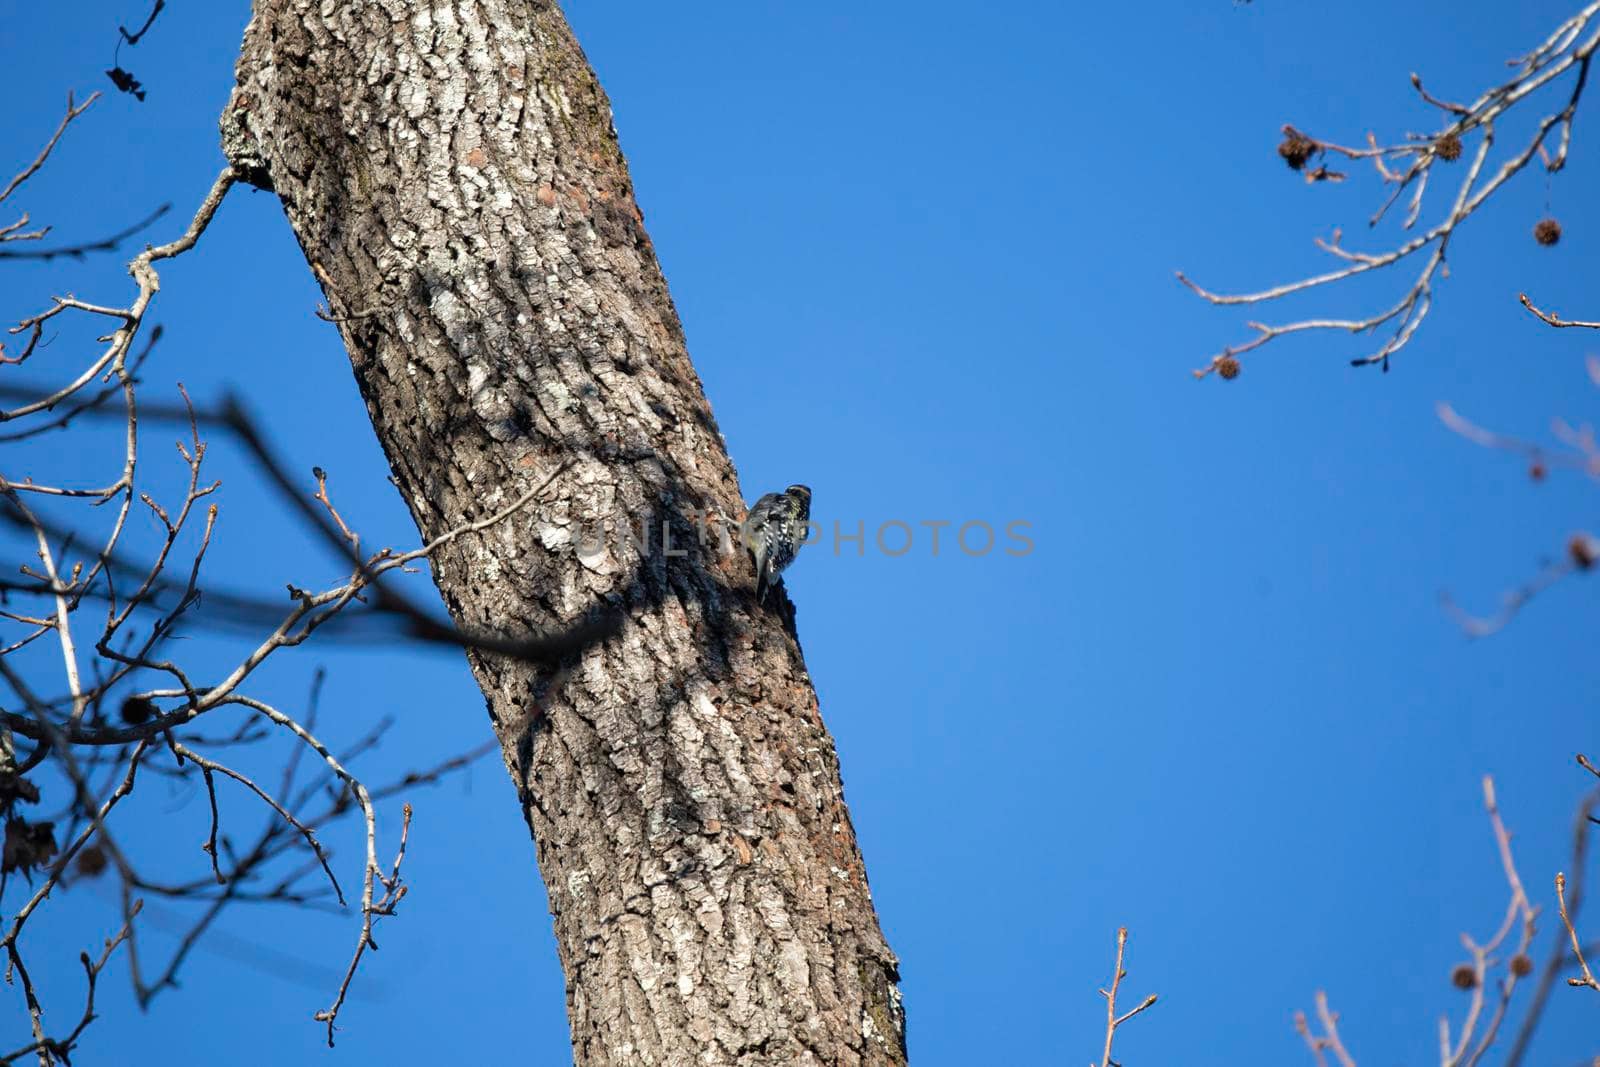 Yellow-bellied sapsucker (Sphyrapicus varius) foraging along a tree on a bright, blue day